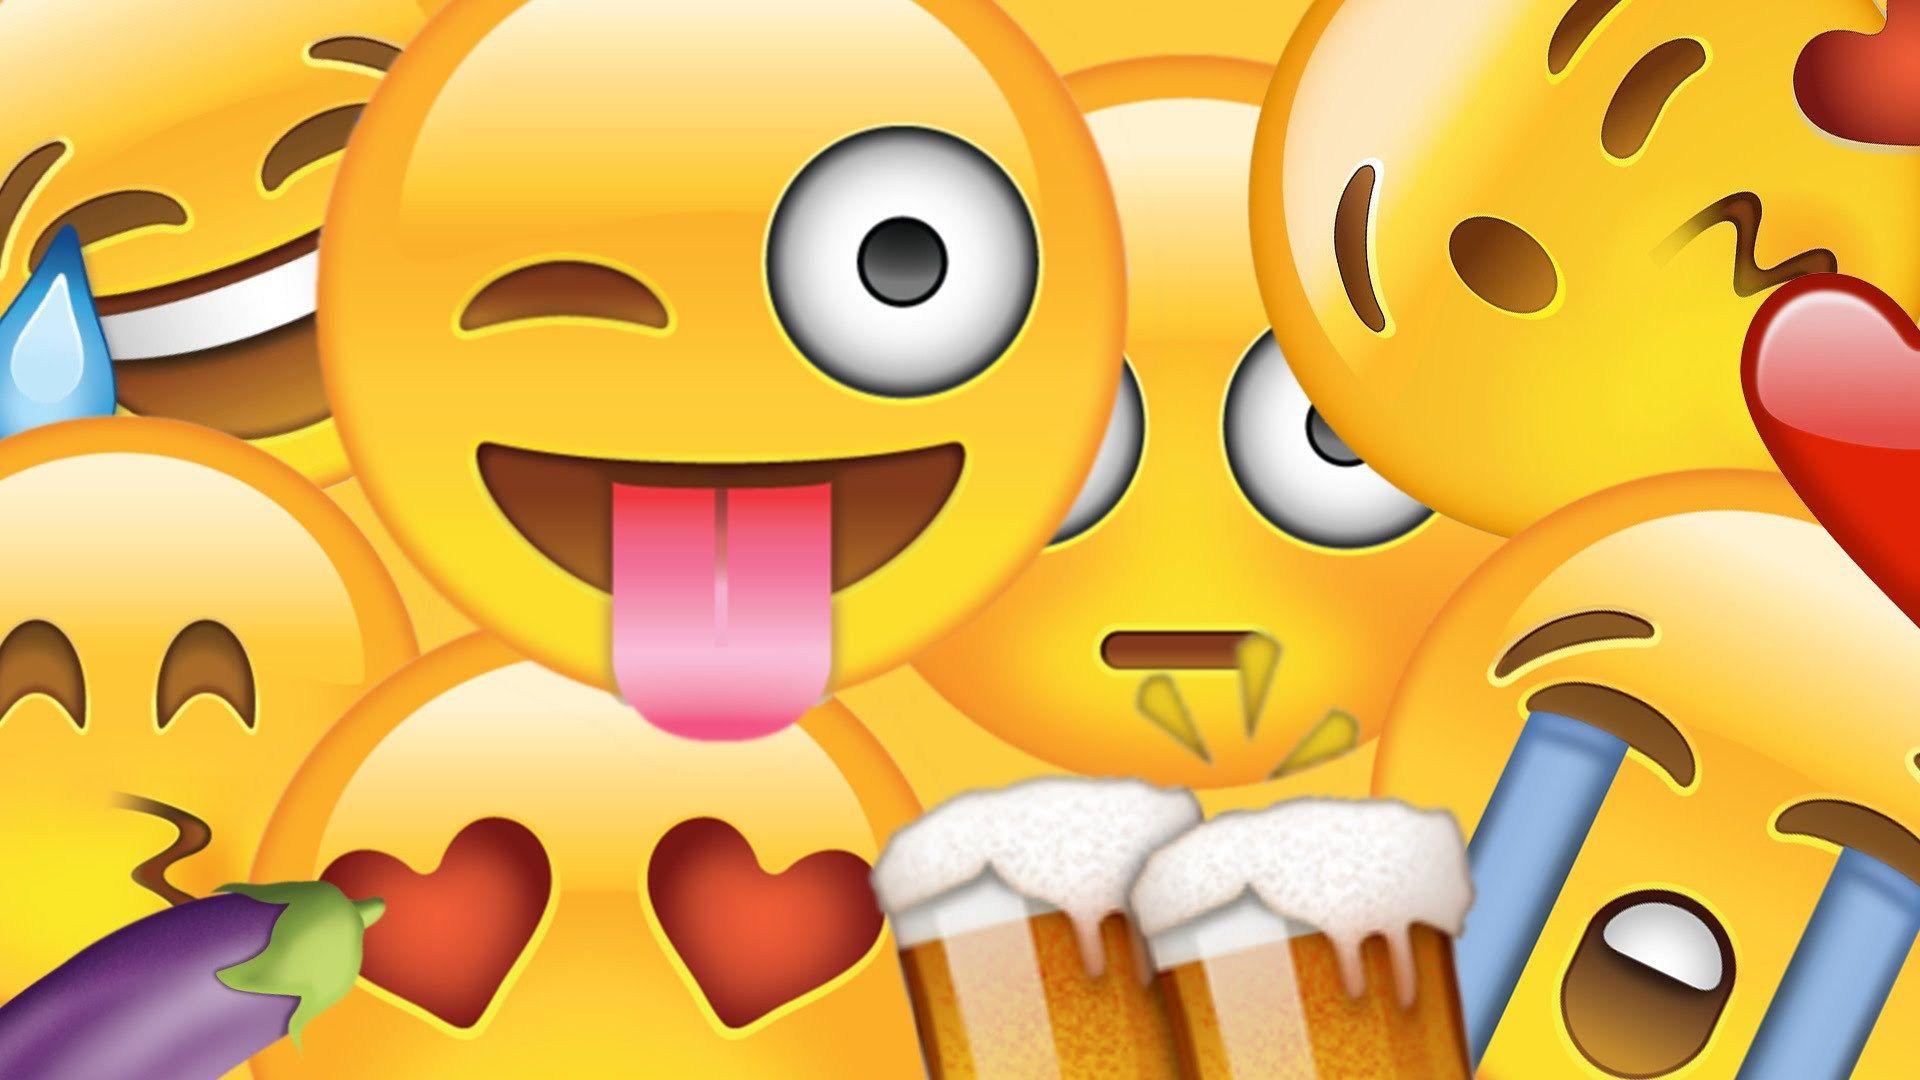 The Good, The Bad and The Ugly: Why Emojis Are Taking Over the World